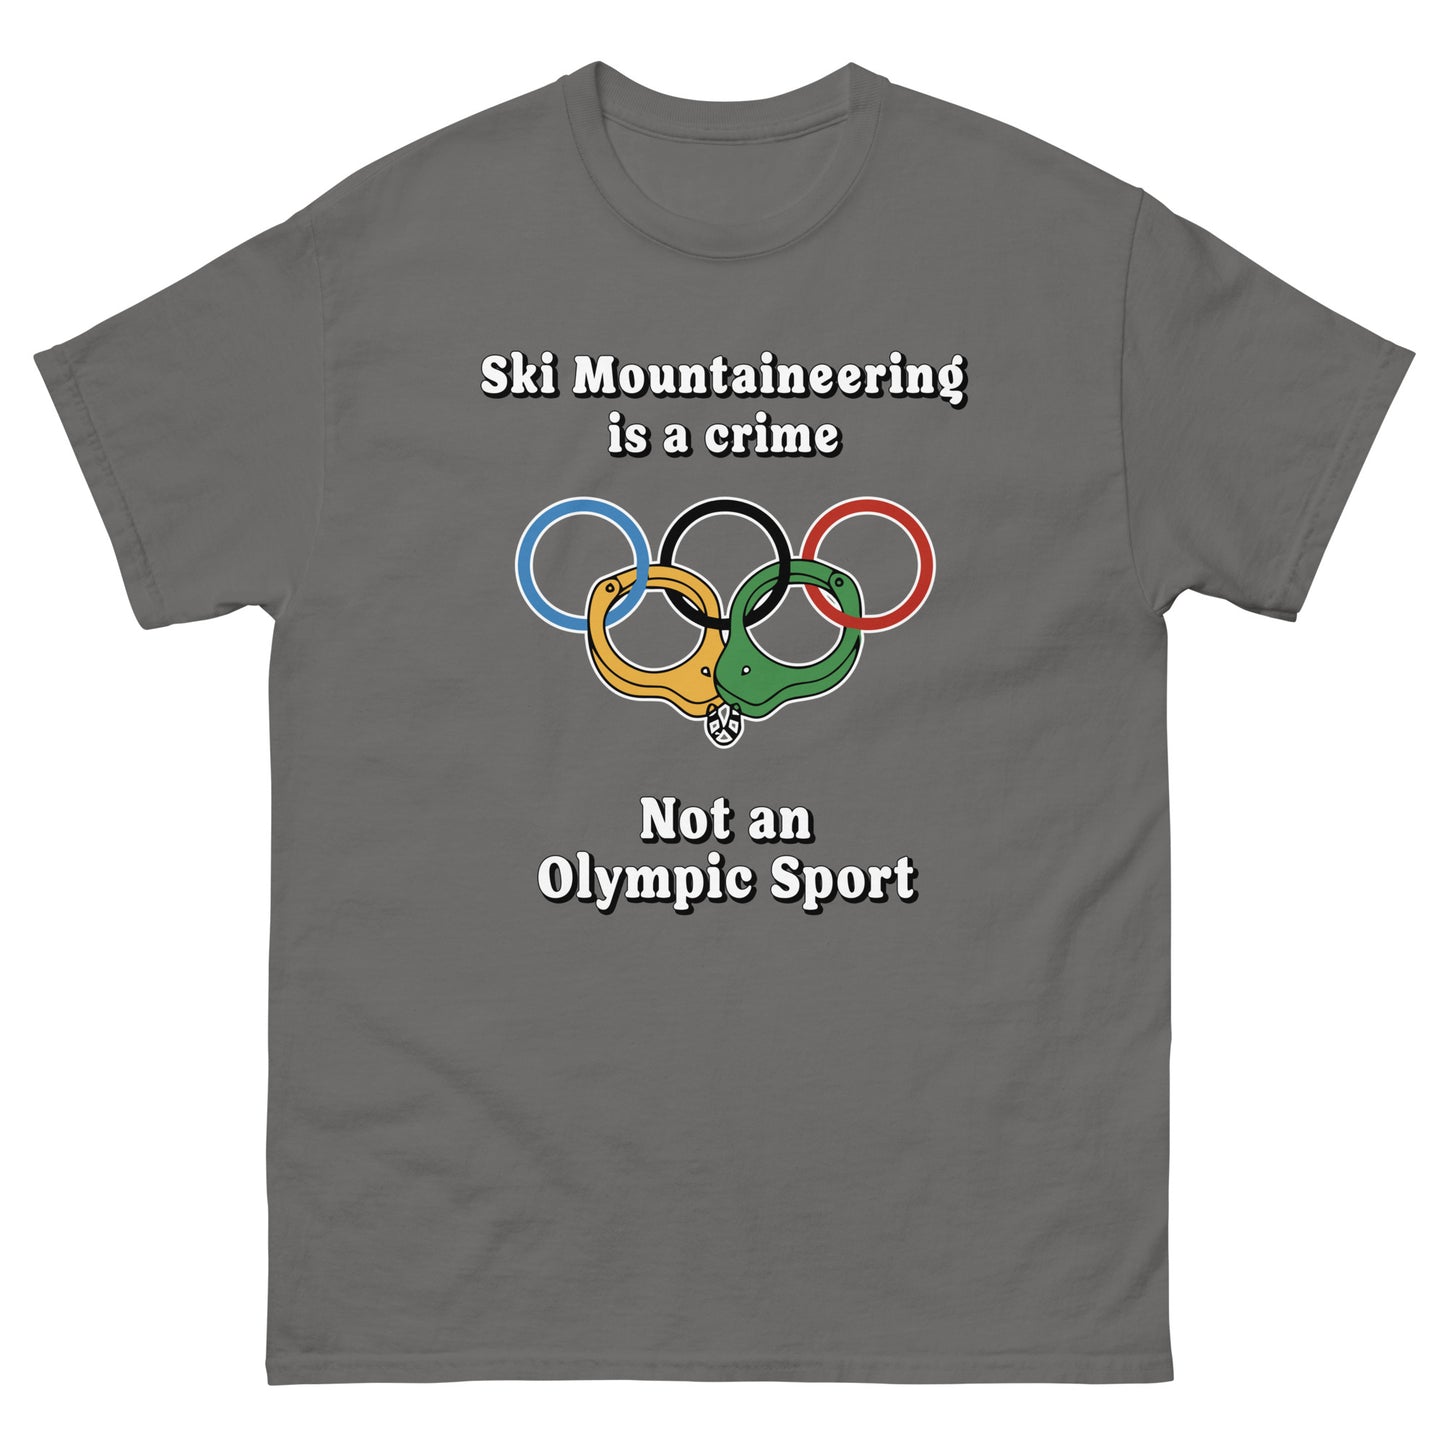 Ski Mountaineering is a Crime T-shirt